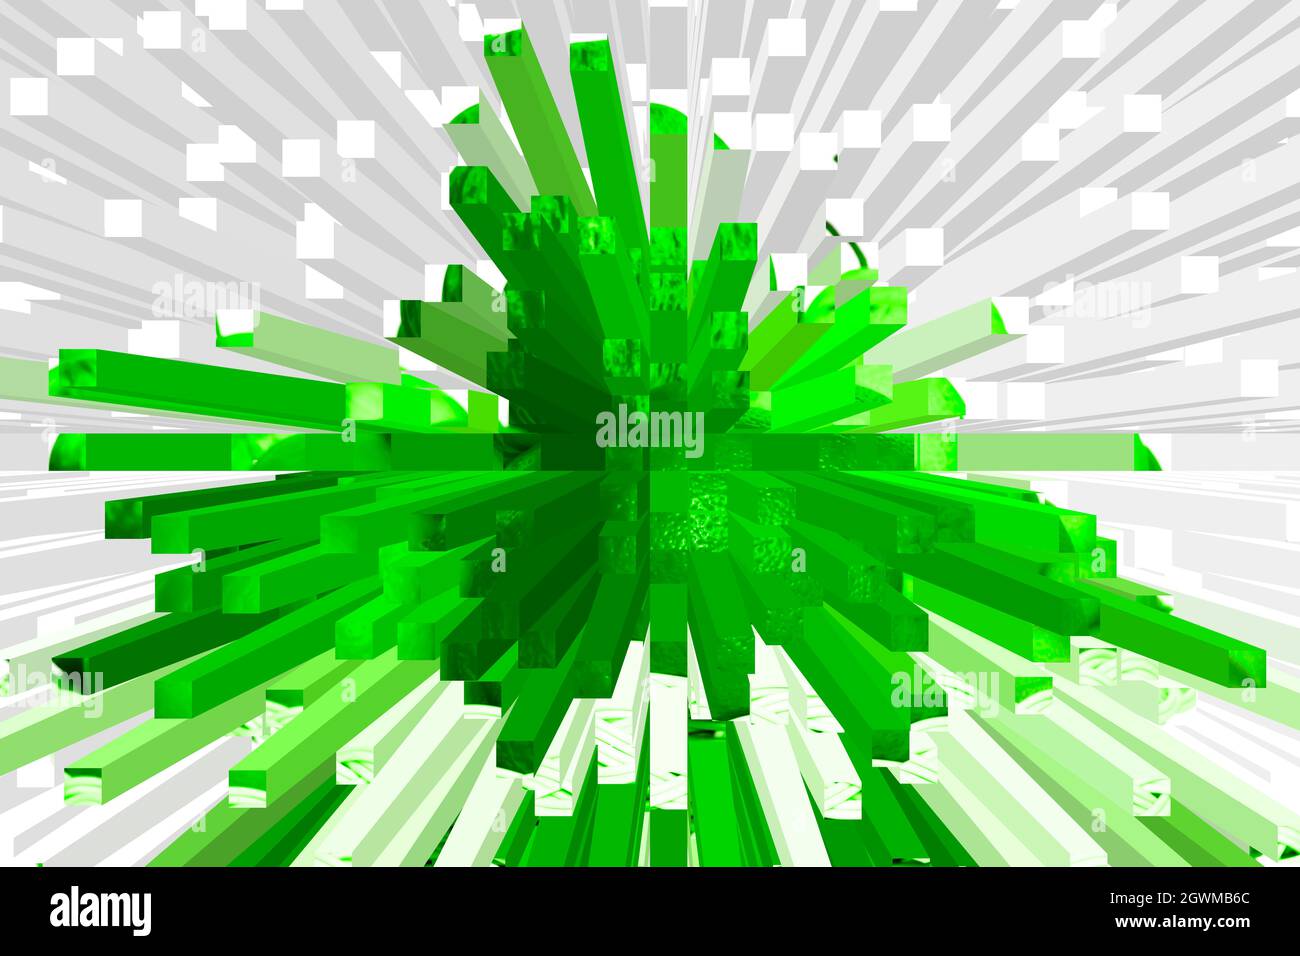 Beautiful Green And White 3D Illustrator Explosion Effect. Useful For Backdrop Design Stock Photo